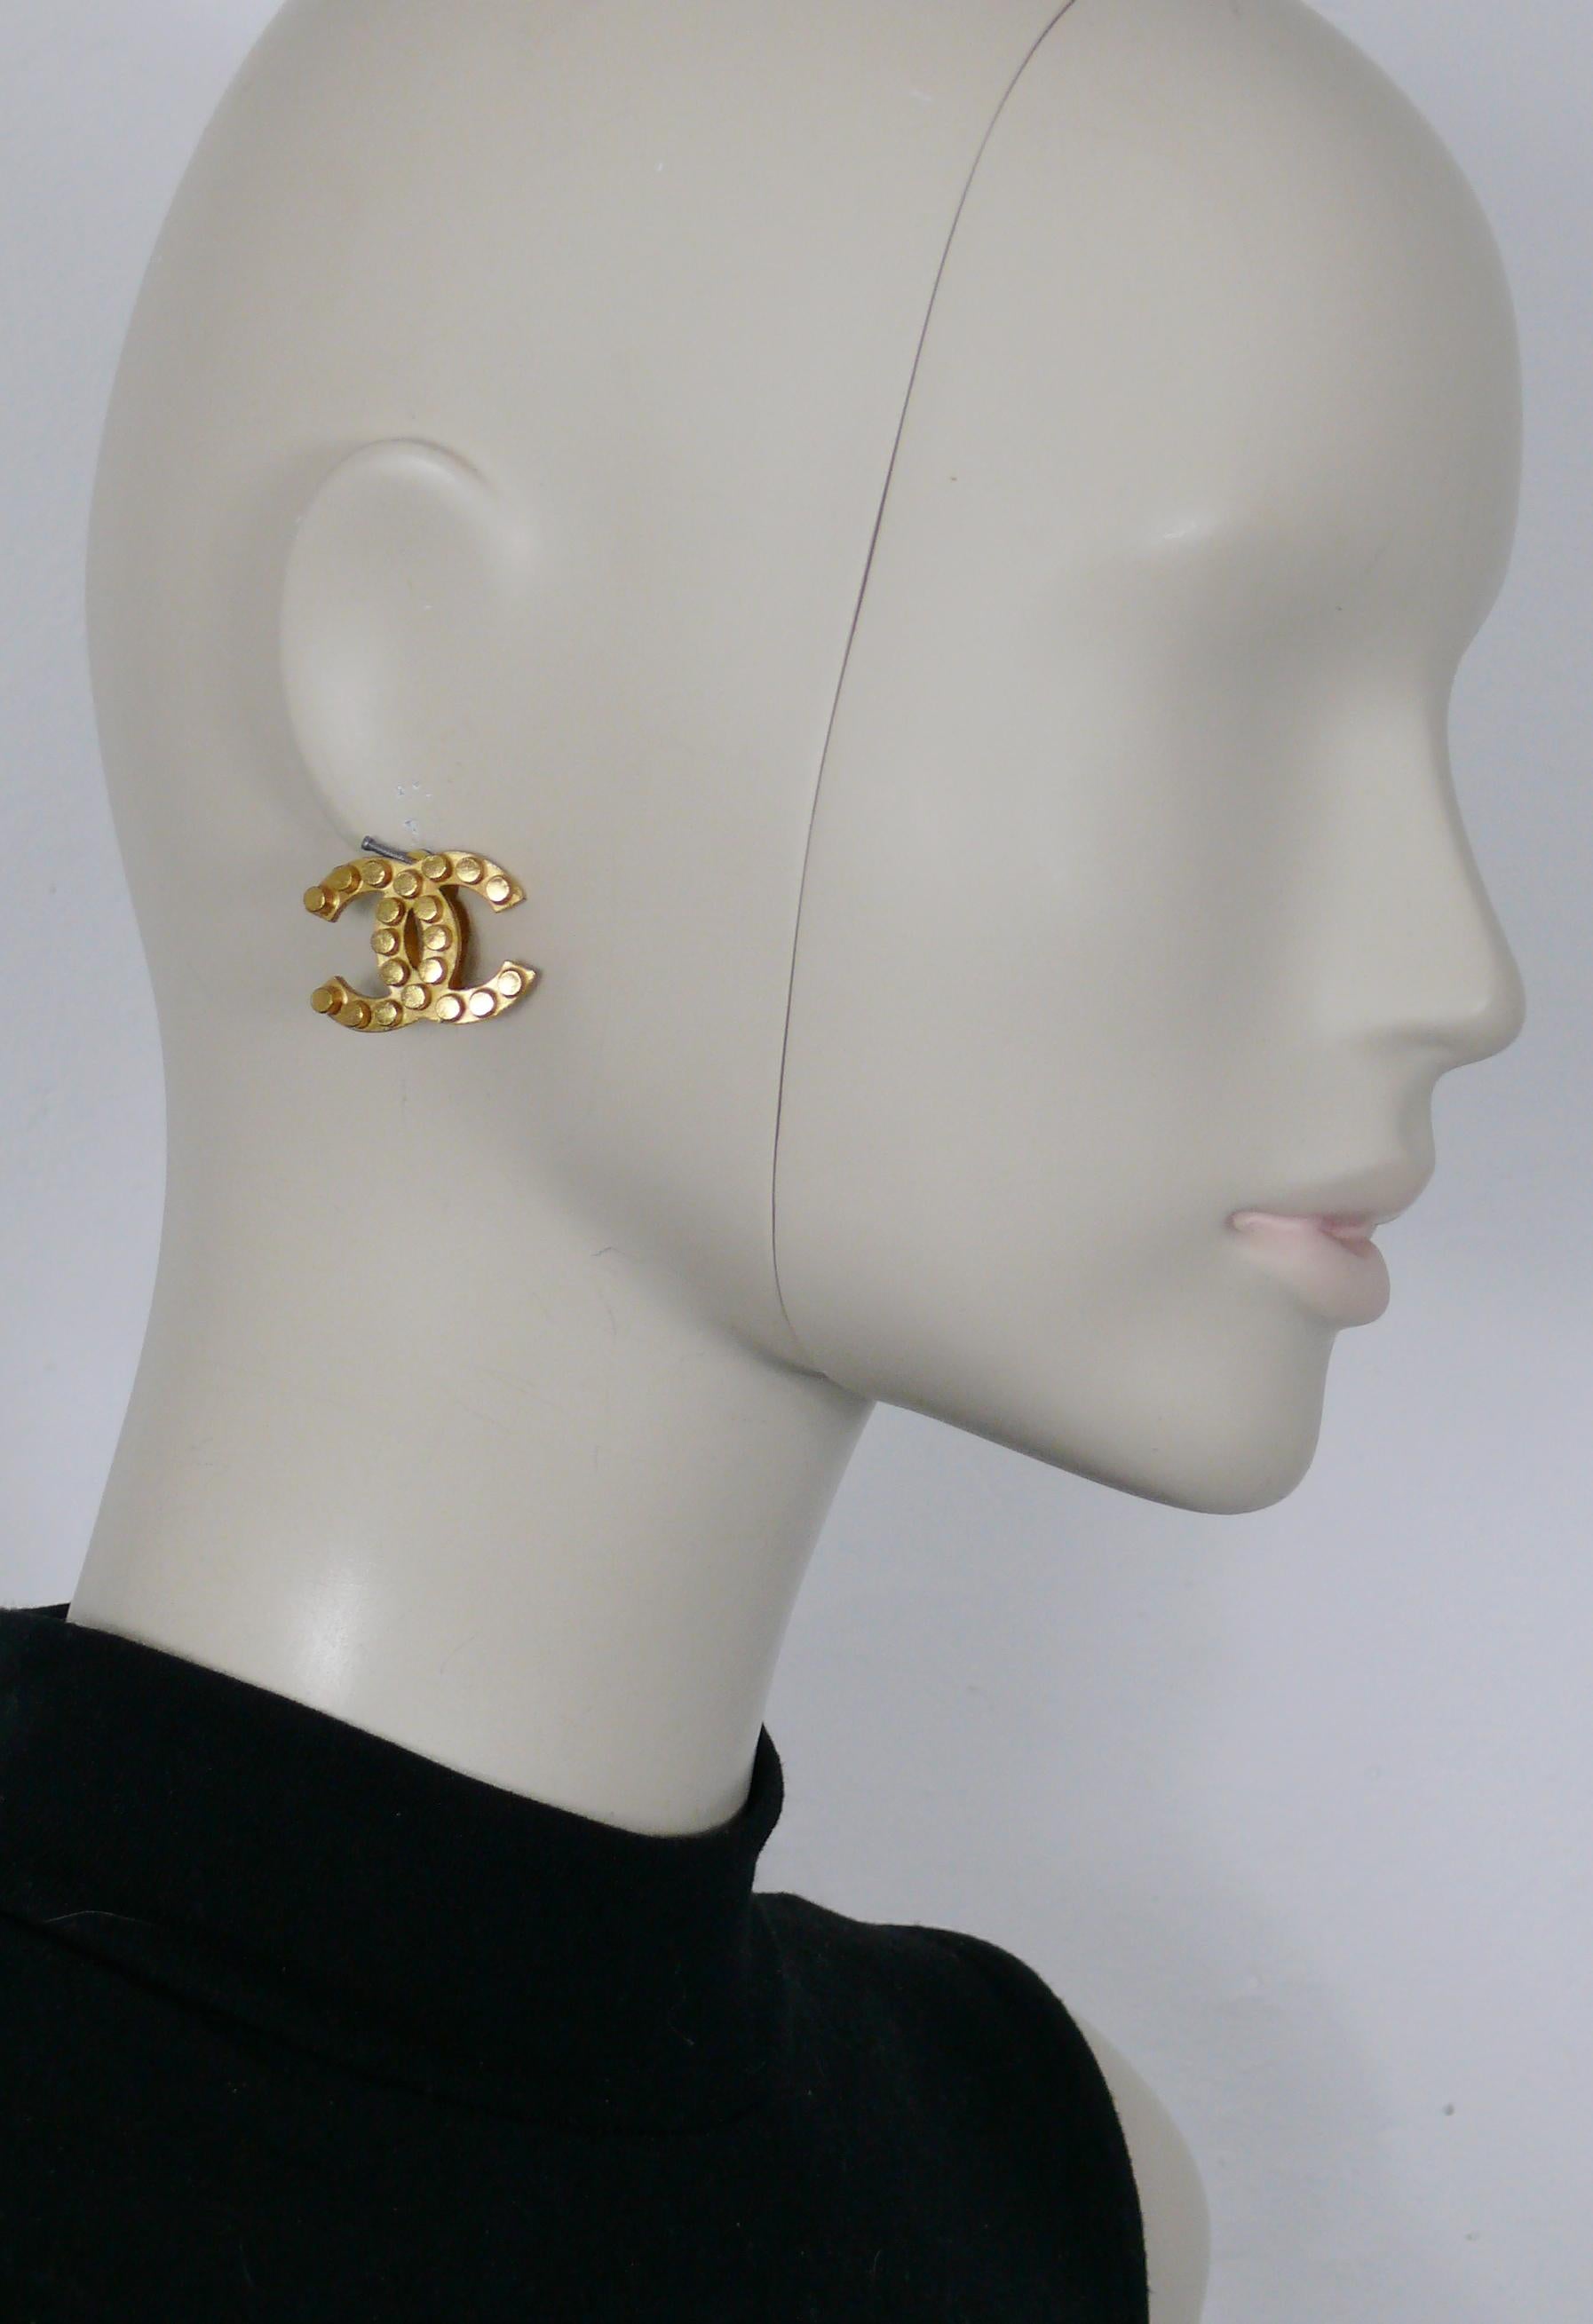 CHANEL vintage gold toned CC logo clip-on earrings featuring a lego pattern design.

Fall 2002 Collection.

Embossed CHANEL 02A Made in France.
Private sale 